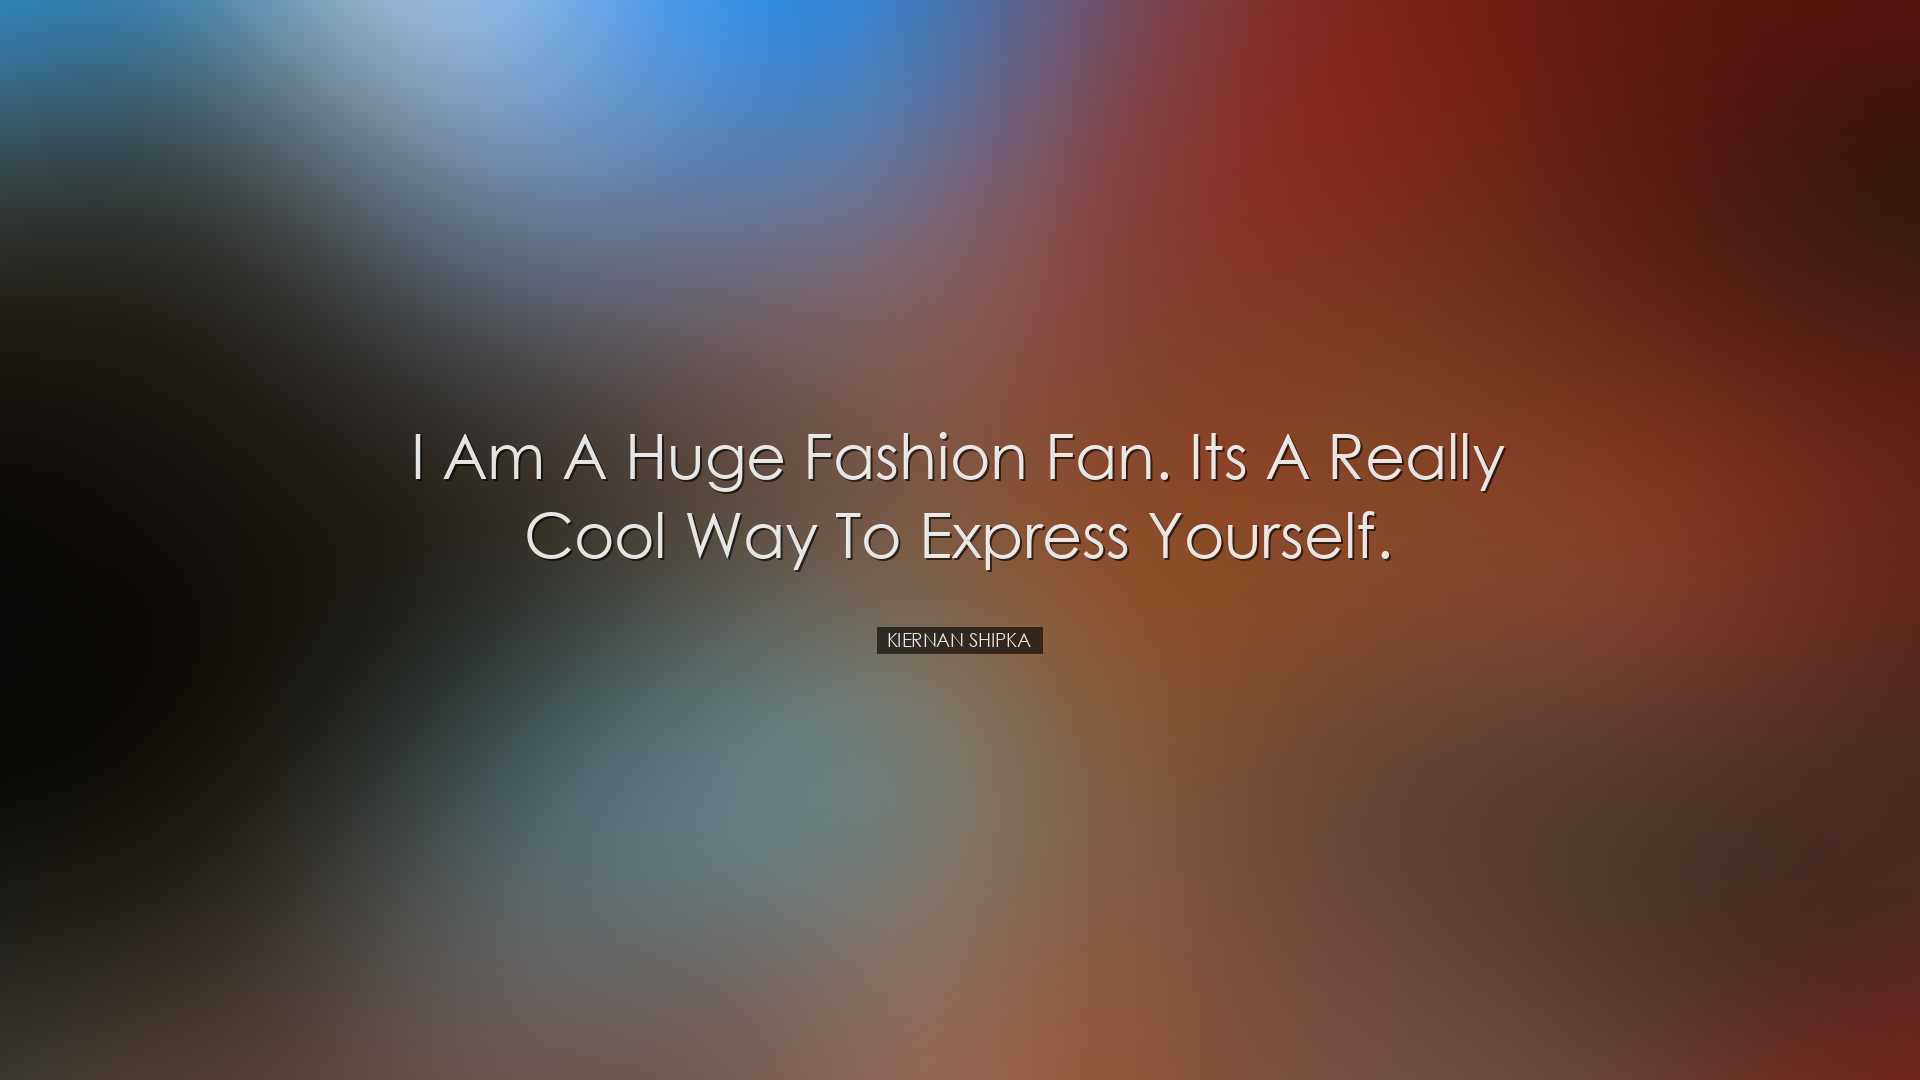 I am a huge fashion fan. Its a really cool way to express yourself